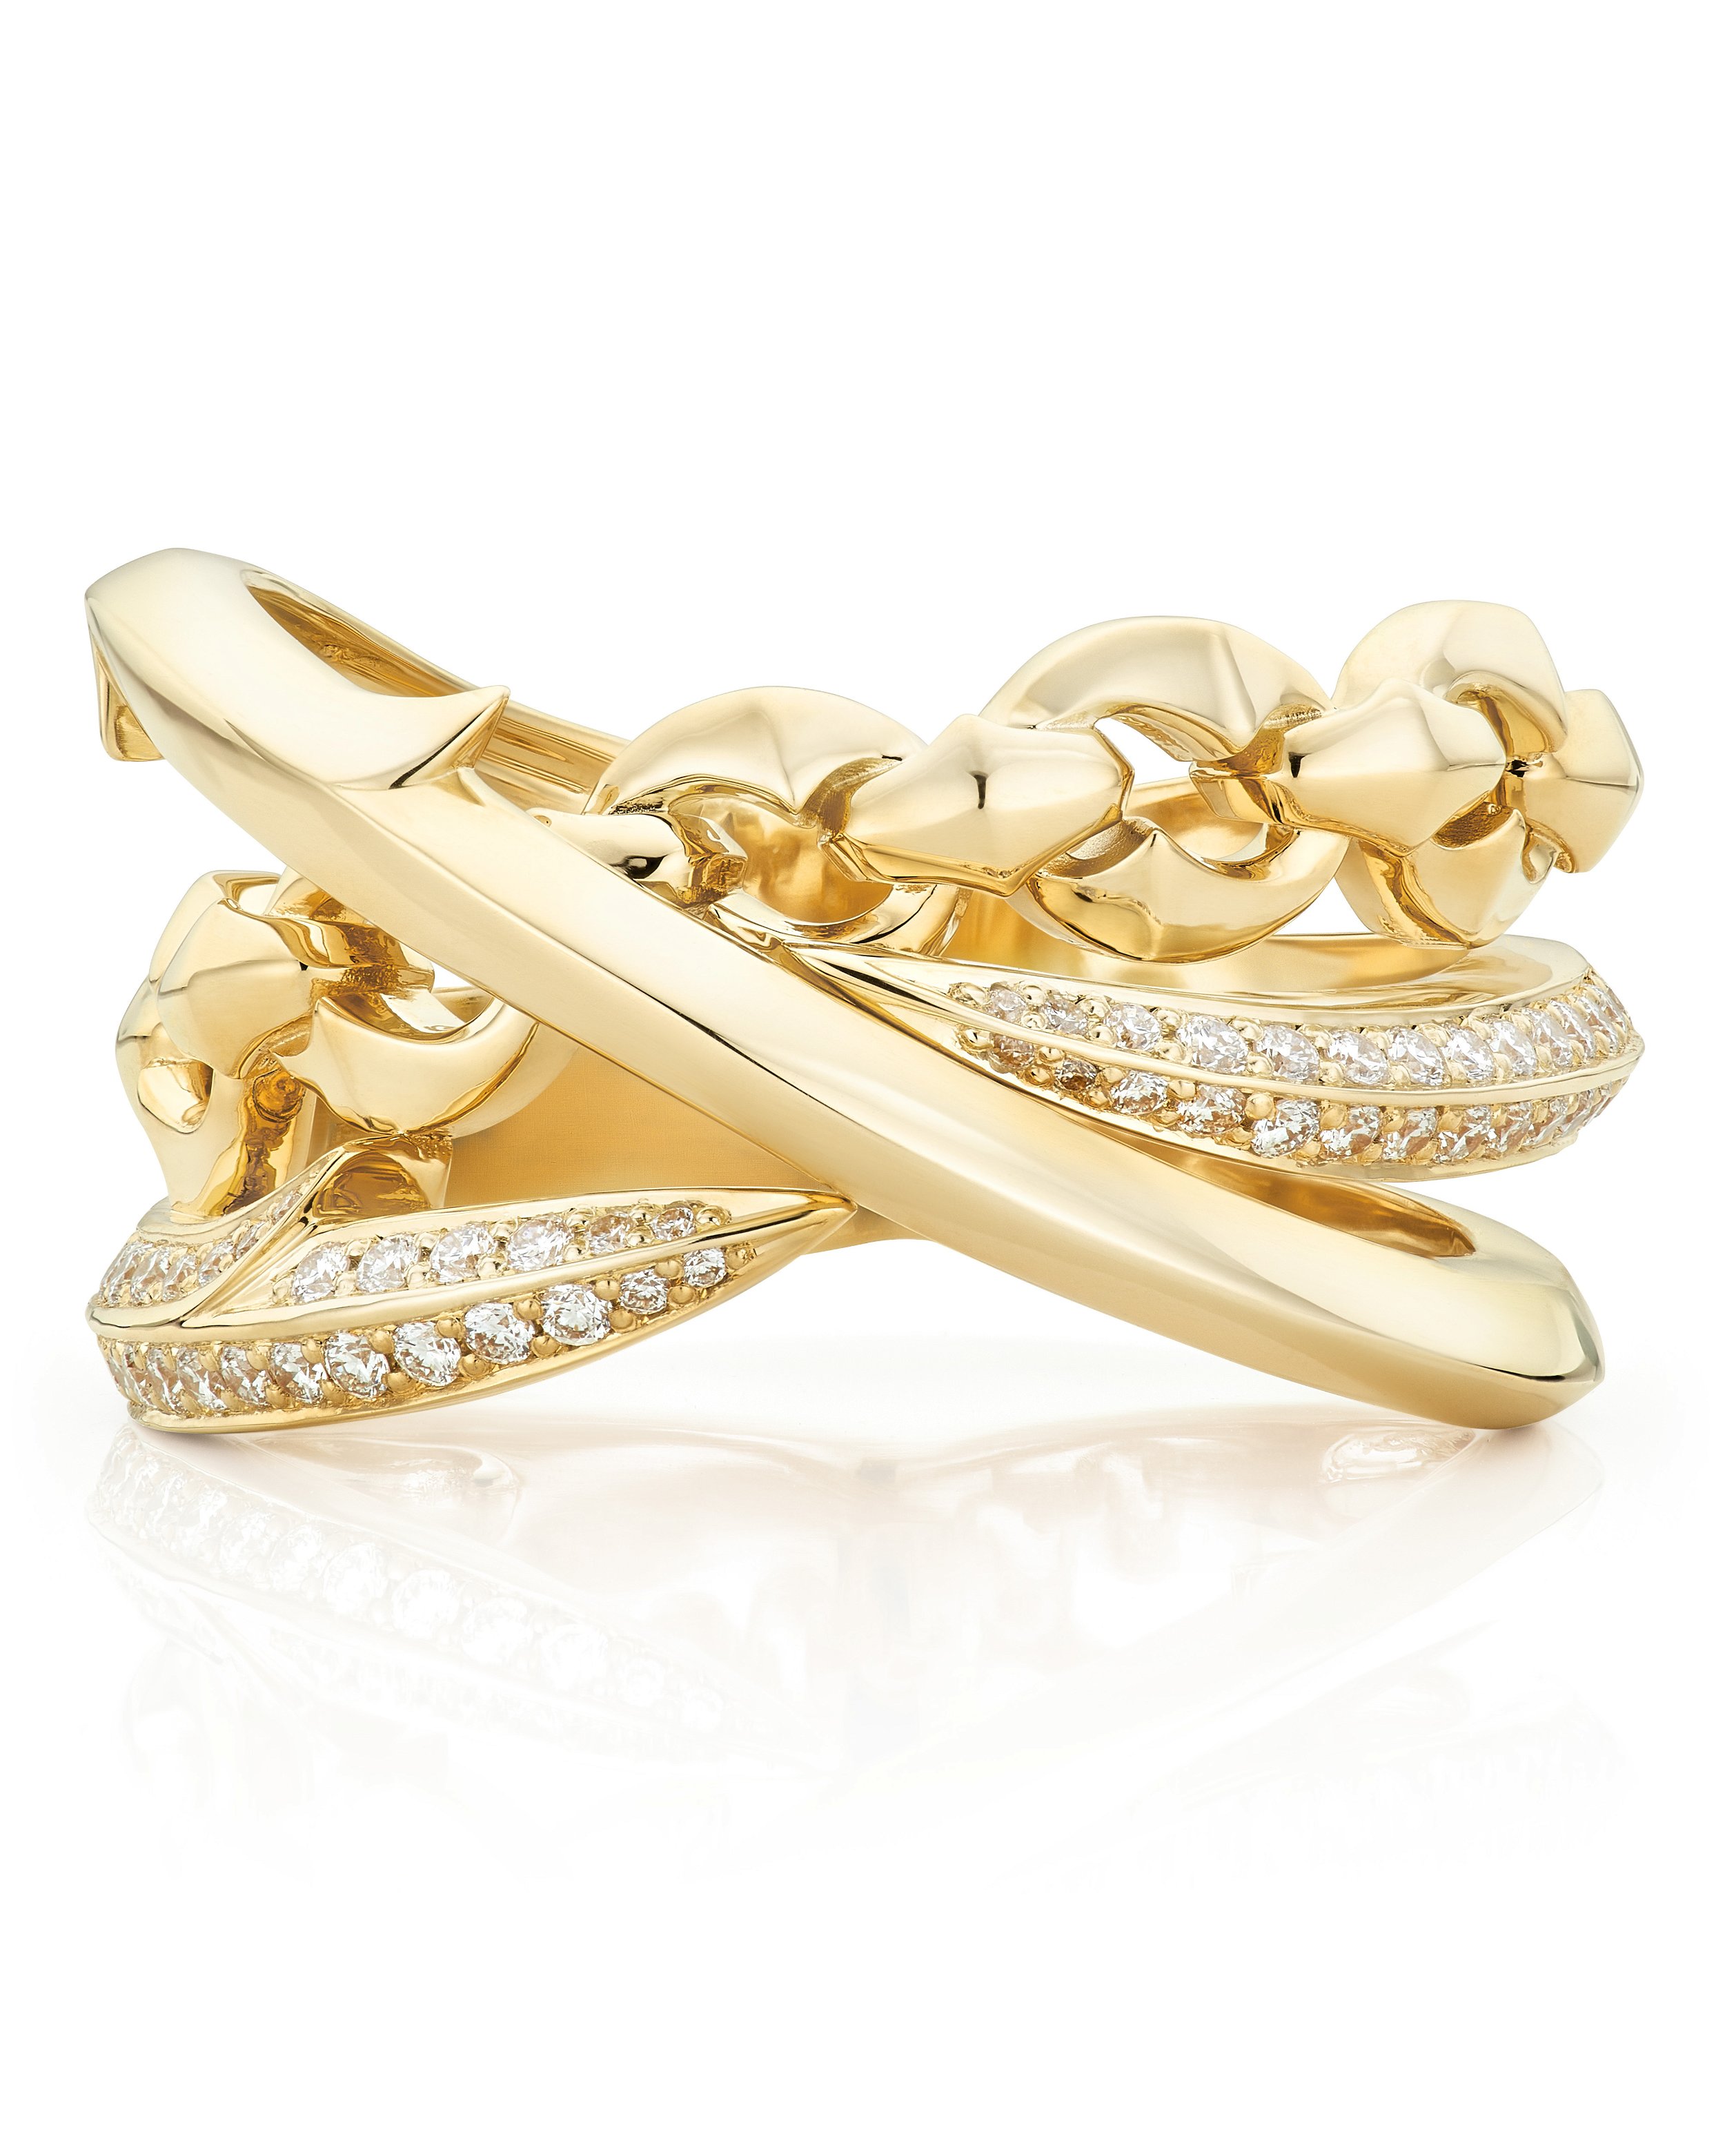 Thorn Embrace Bound Together Band Ring with White Diamonds in 18kt Yellow Gold - Size 7